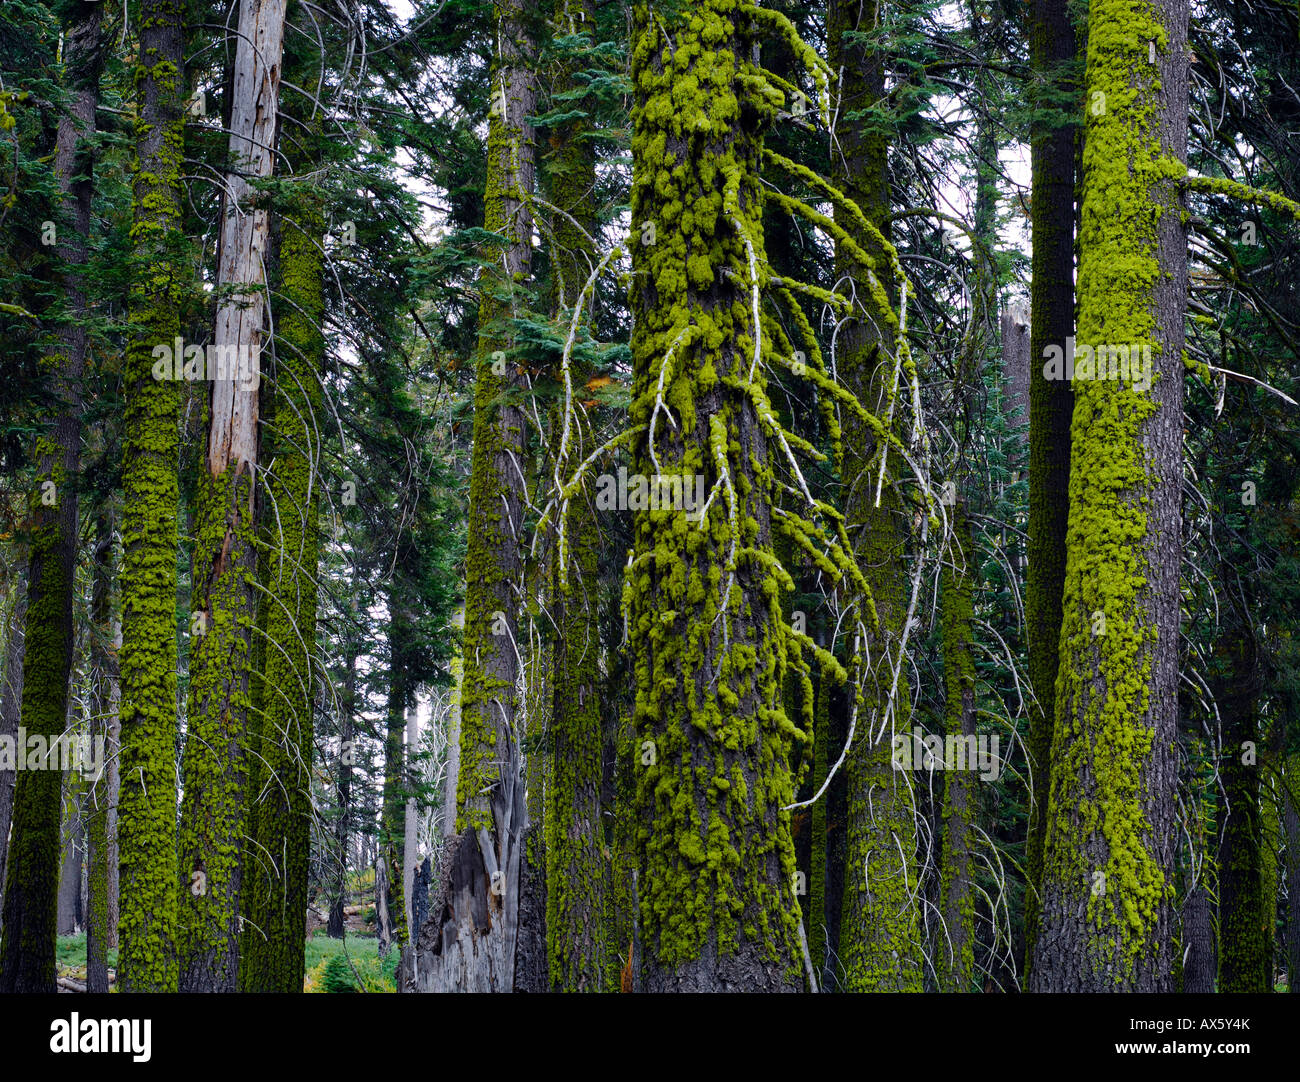 Moss-covered spruce tree trunks, Sequoia National Park, California, USA Stock Photo